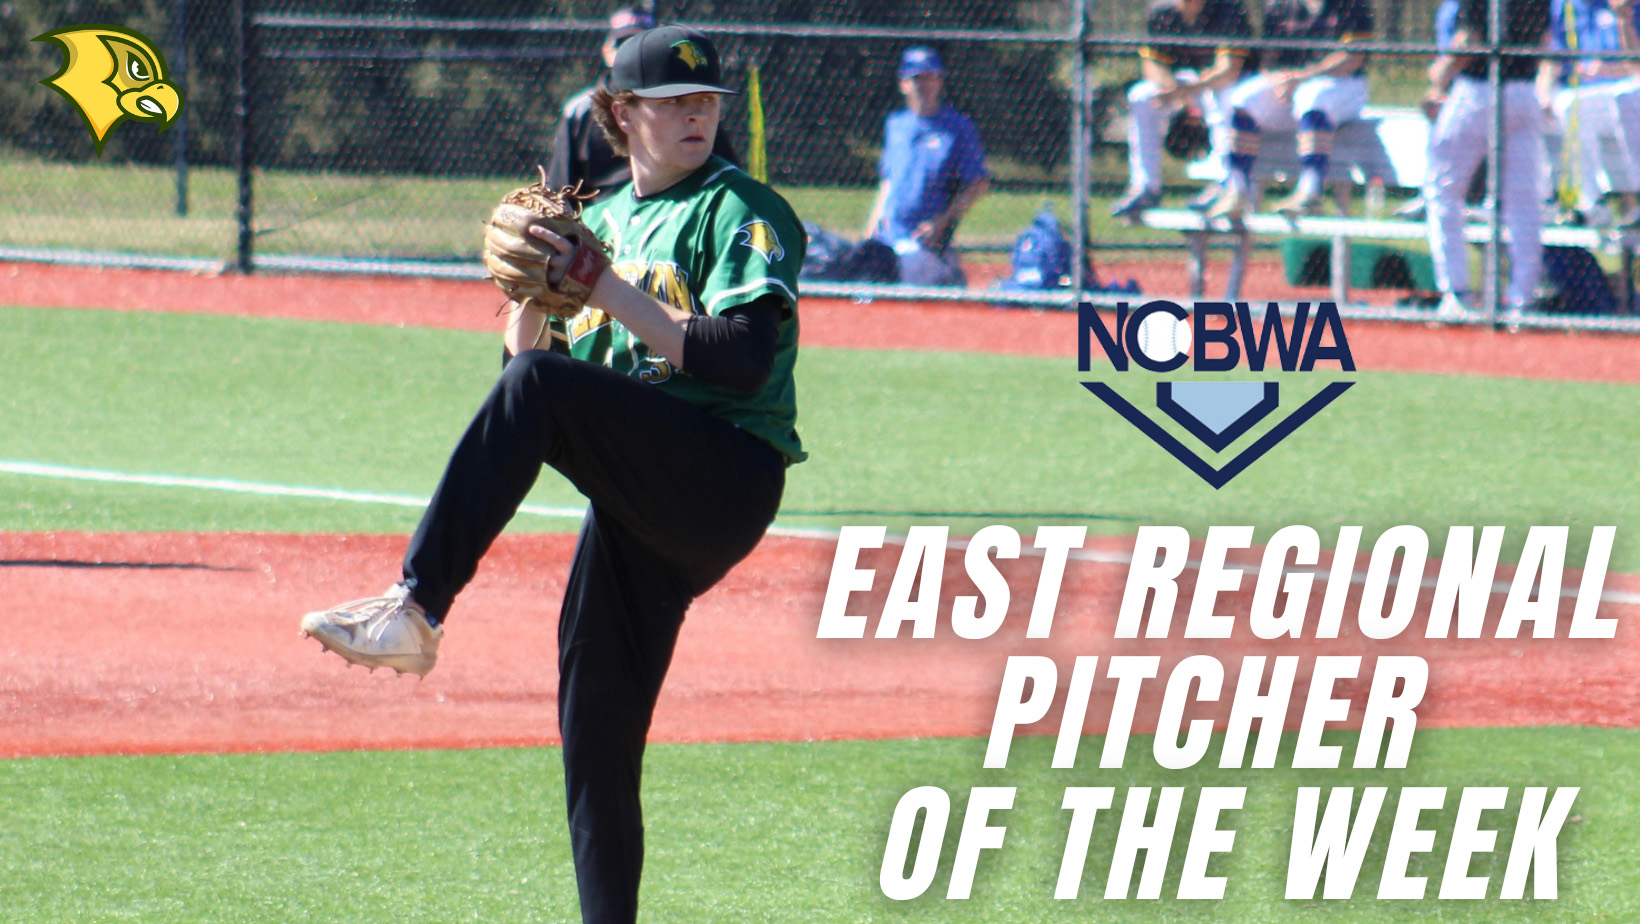 Felician Pitcher Selected as NCBWA East Regional Pitcher of the Week